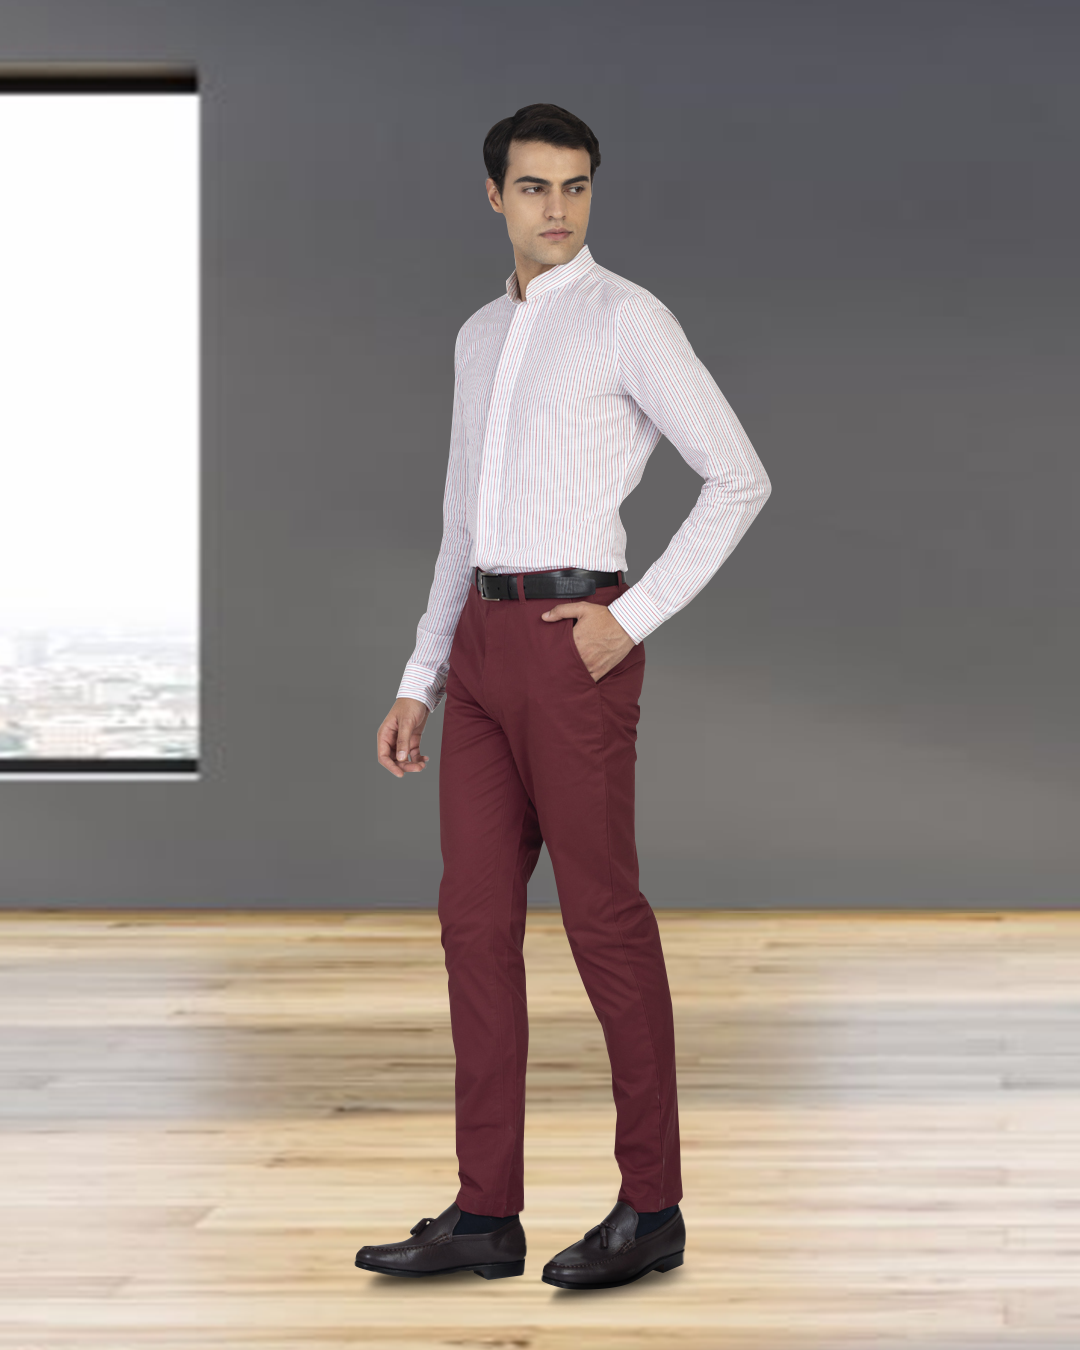 Sdie view of model wearing custom Genoa Chino pants for men by Luxire in plum